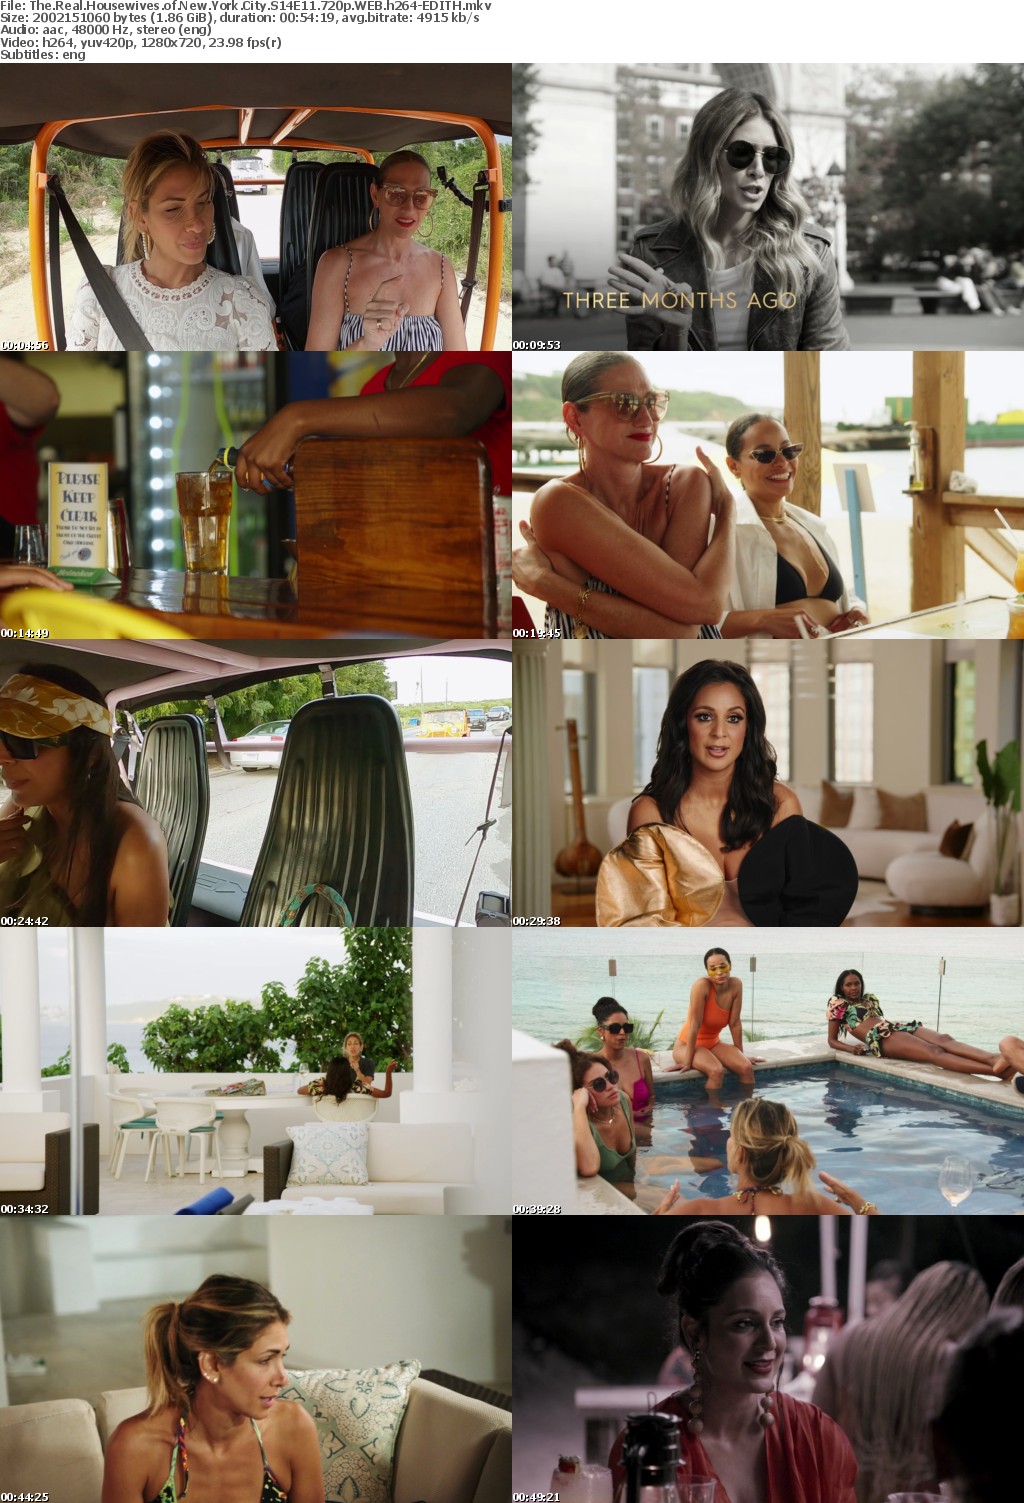 The Real Housewives of New York City S14E11 720p WEB h264-EDITH